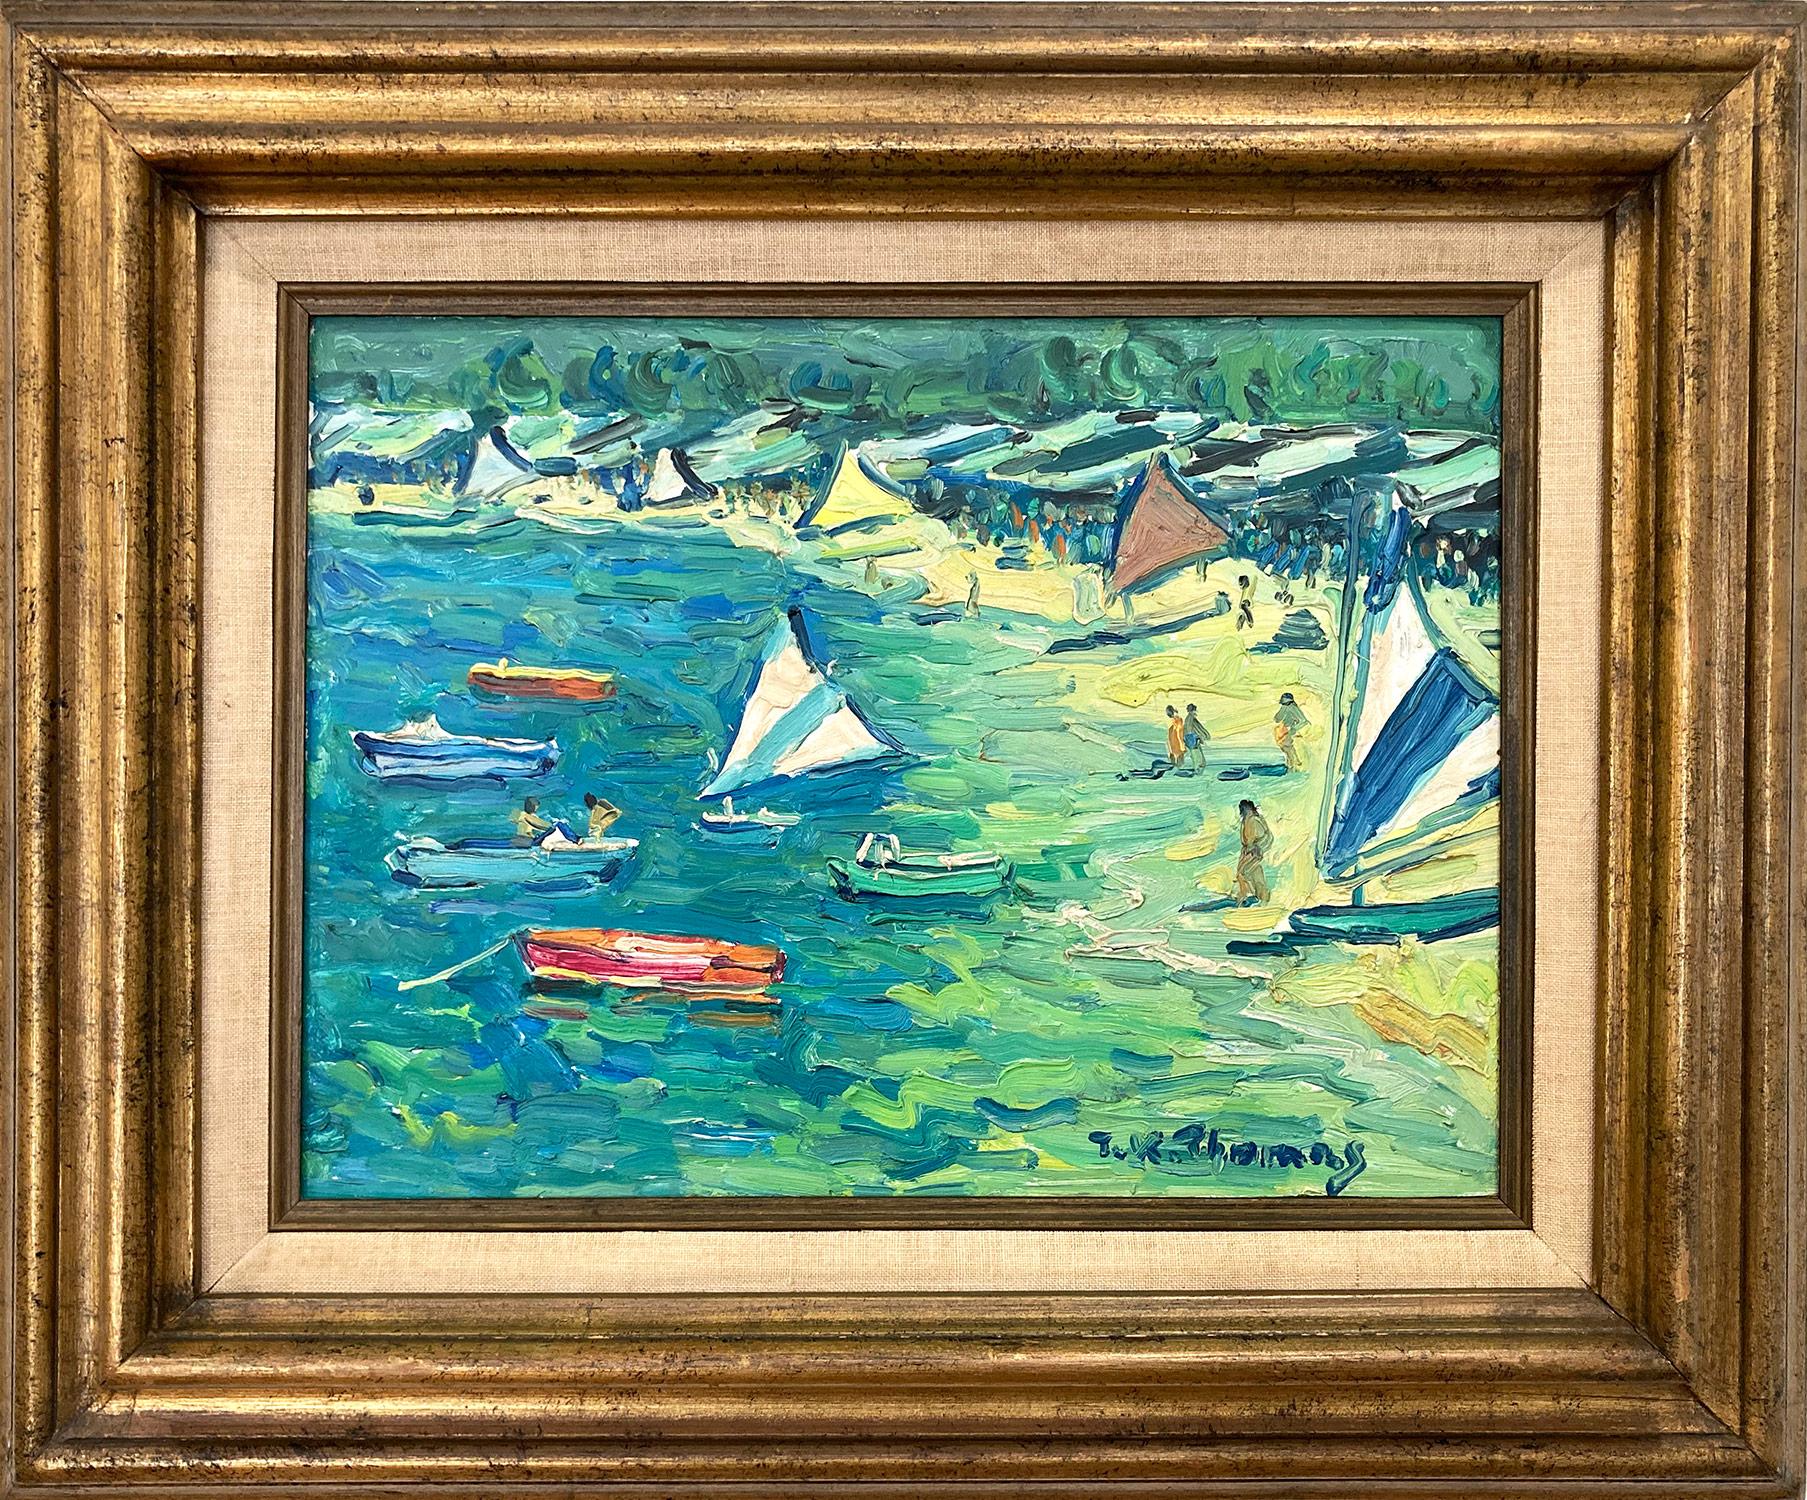 Tibor K Thomas Landscape Painting - "Sailboats at the Beach" Impressionist Mid Century Seascape Oil Painting Canvas